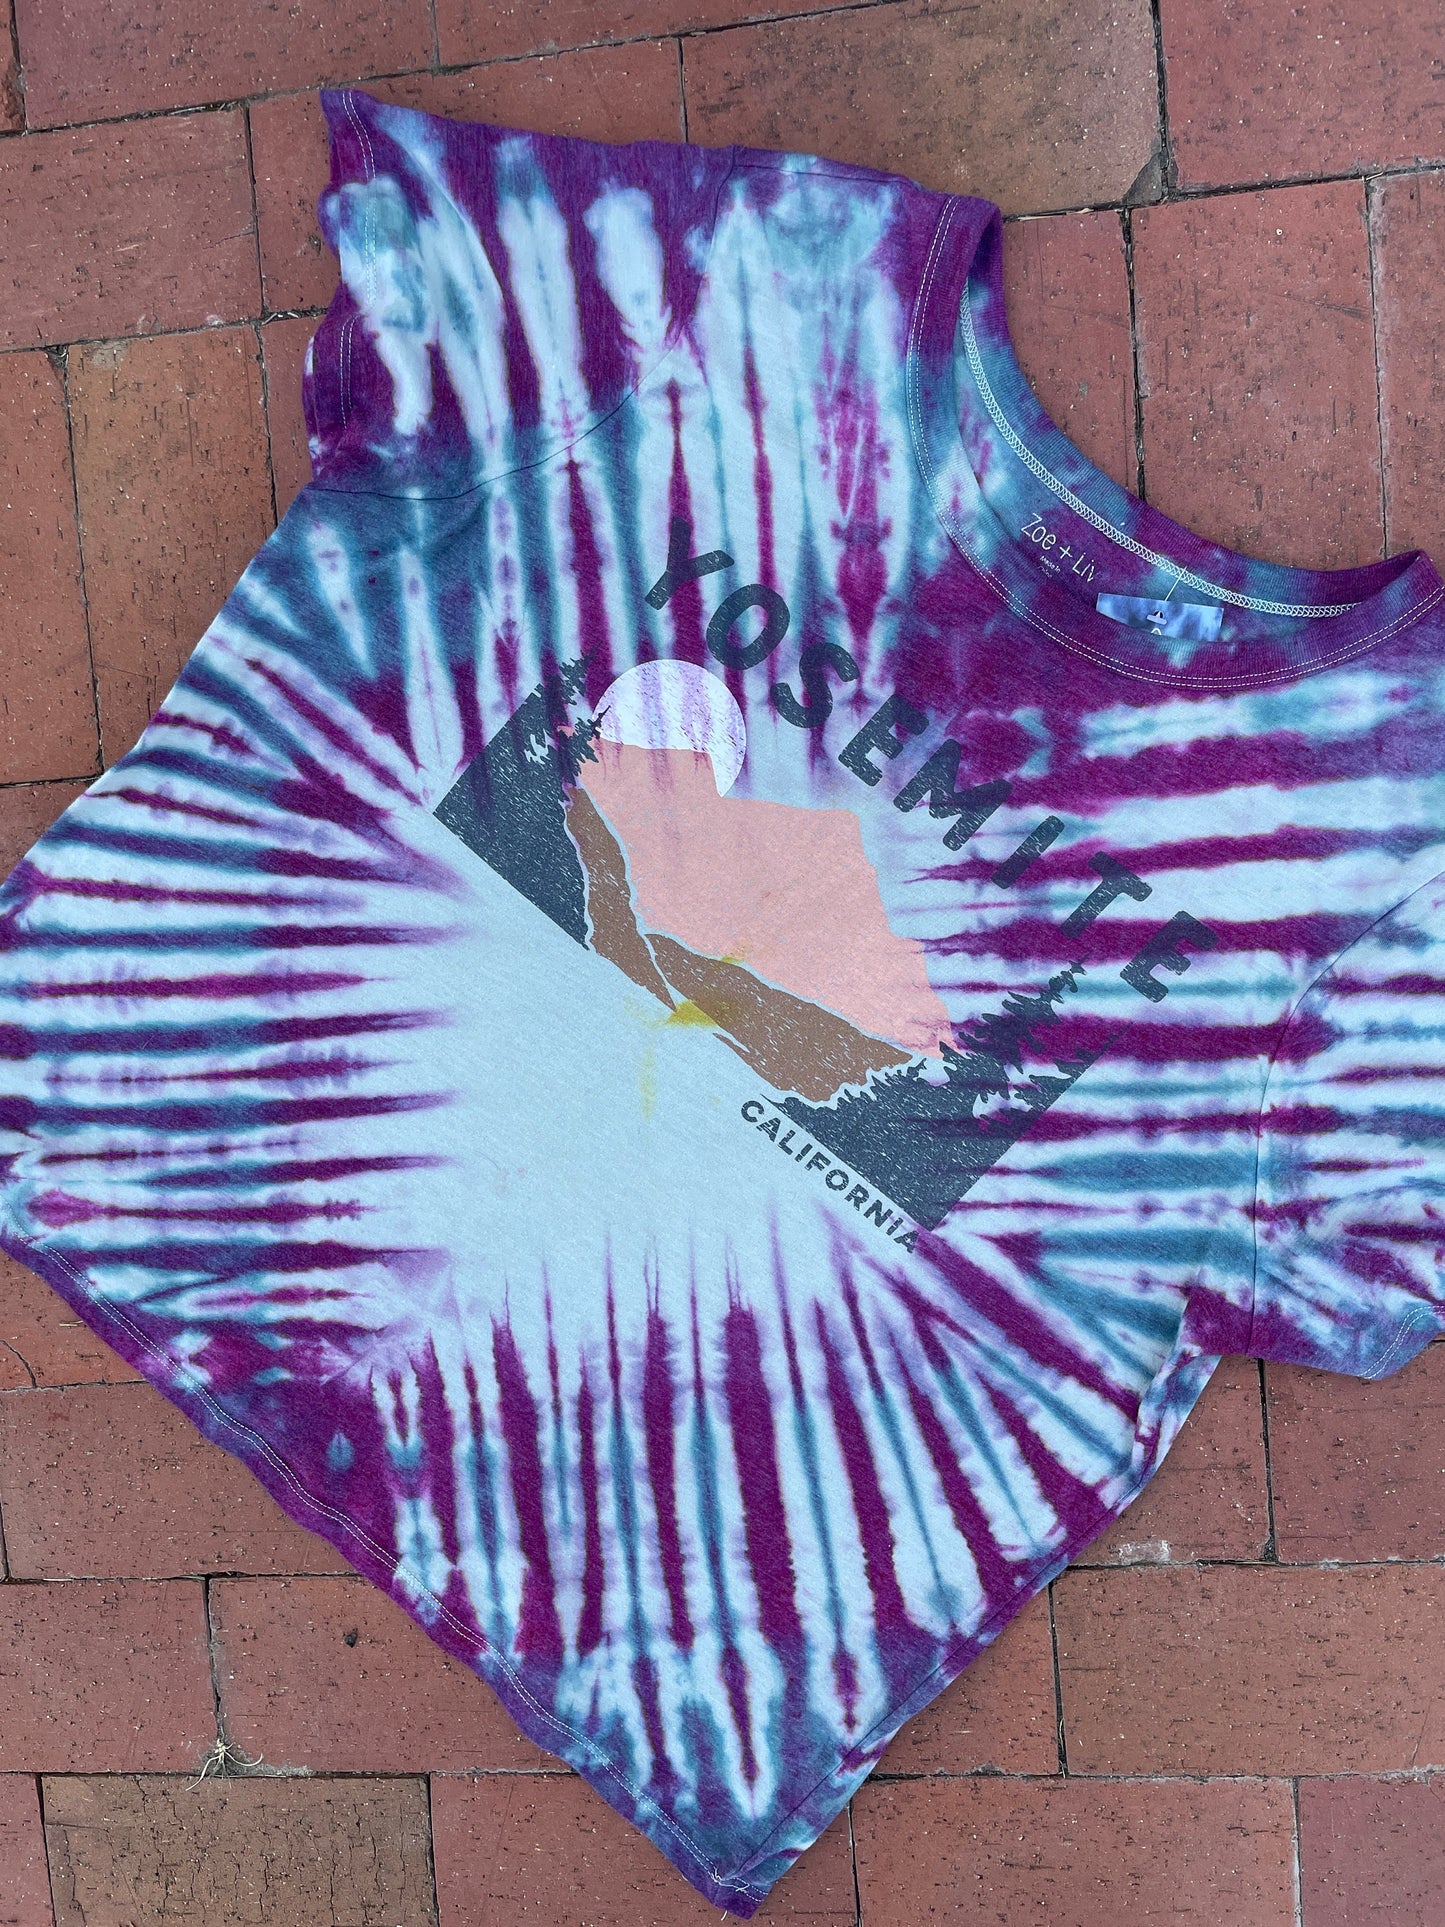 2XL Junior's Yosemite Mountains Tie Dye Short Sleeve T-Shirt | One-Of-a-Kind Upcycled Pink and Teal Graphic Tee